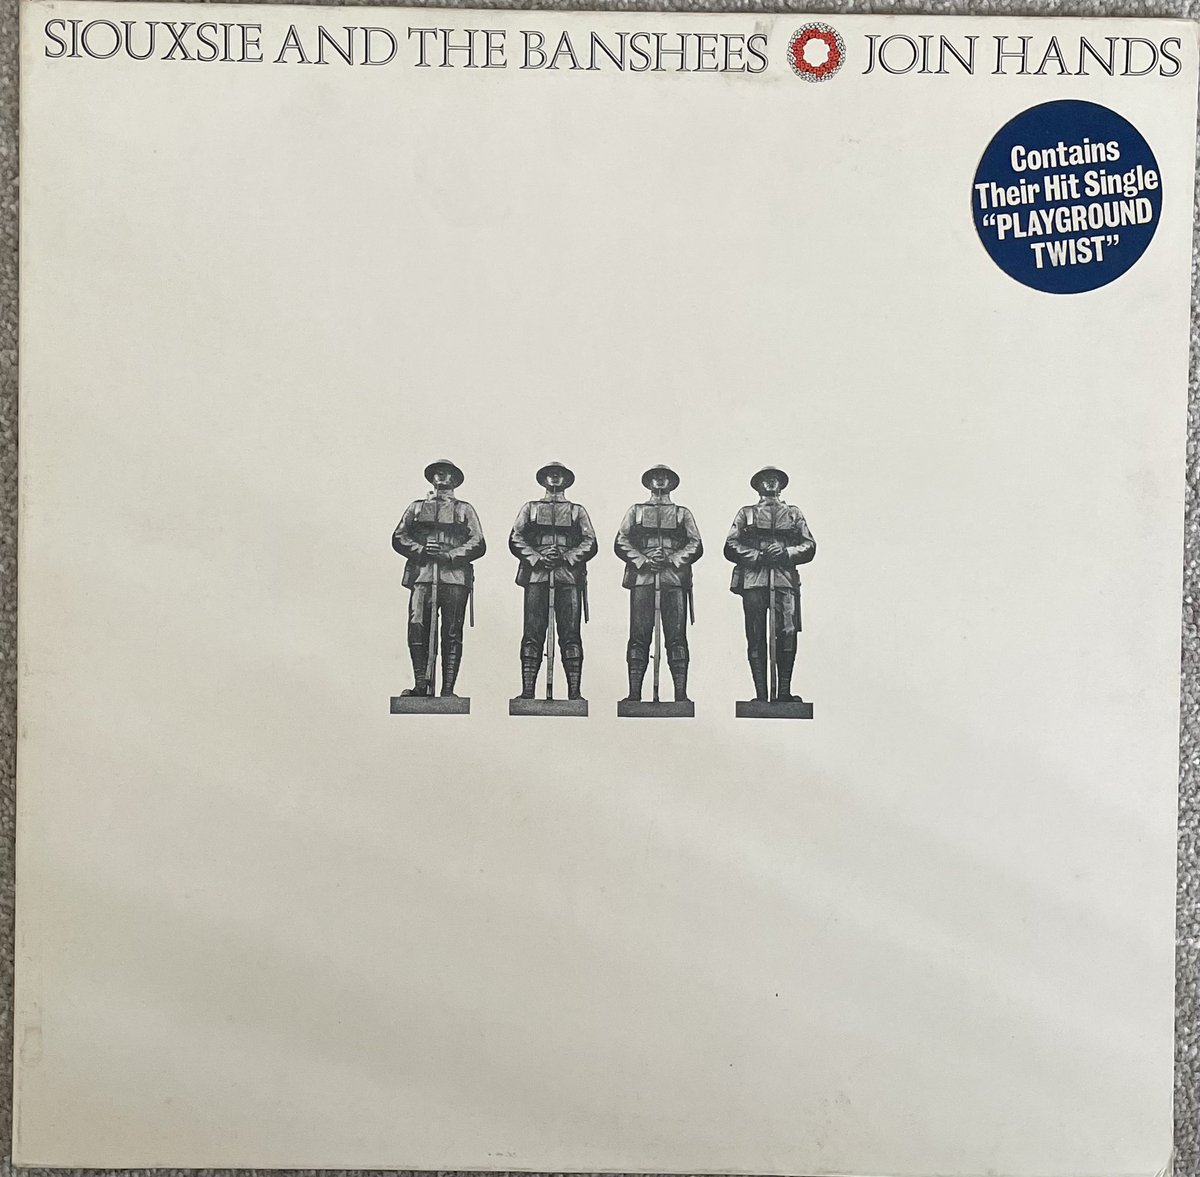 Randomly wondered how many Banshees albums I could play consecutively in one BH Monday on Siouxsie's birthday so started at the beginning and just working my way through 😁🖤 #1 #2 #SiouxsieAndTheBanshees @NewWaveAndPunk @phatalstu @Schnitzel63 @FatOldAnarchist